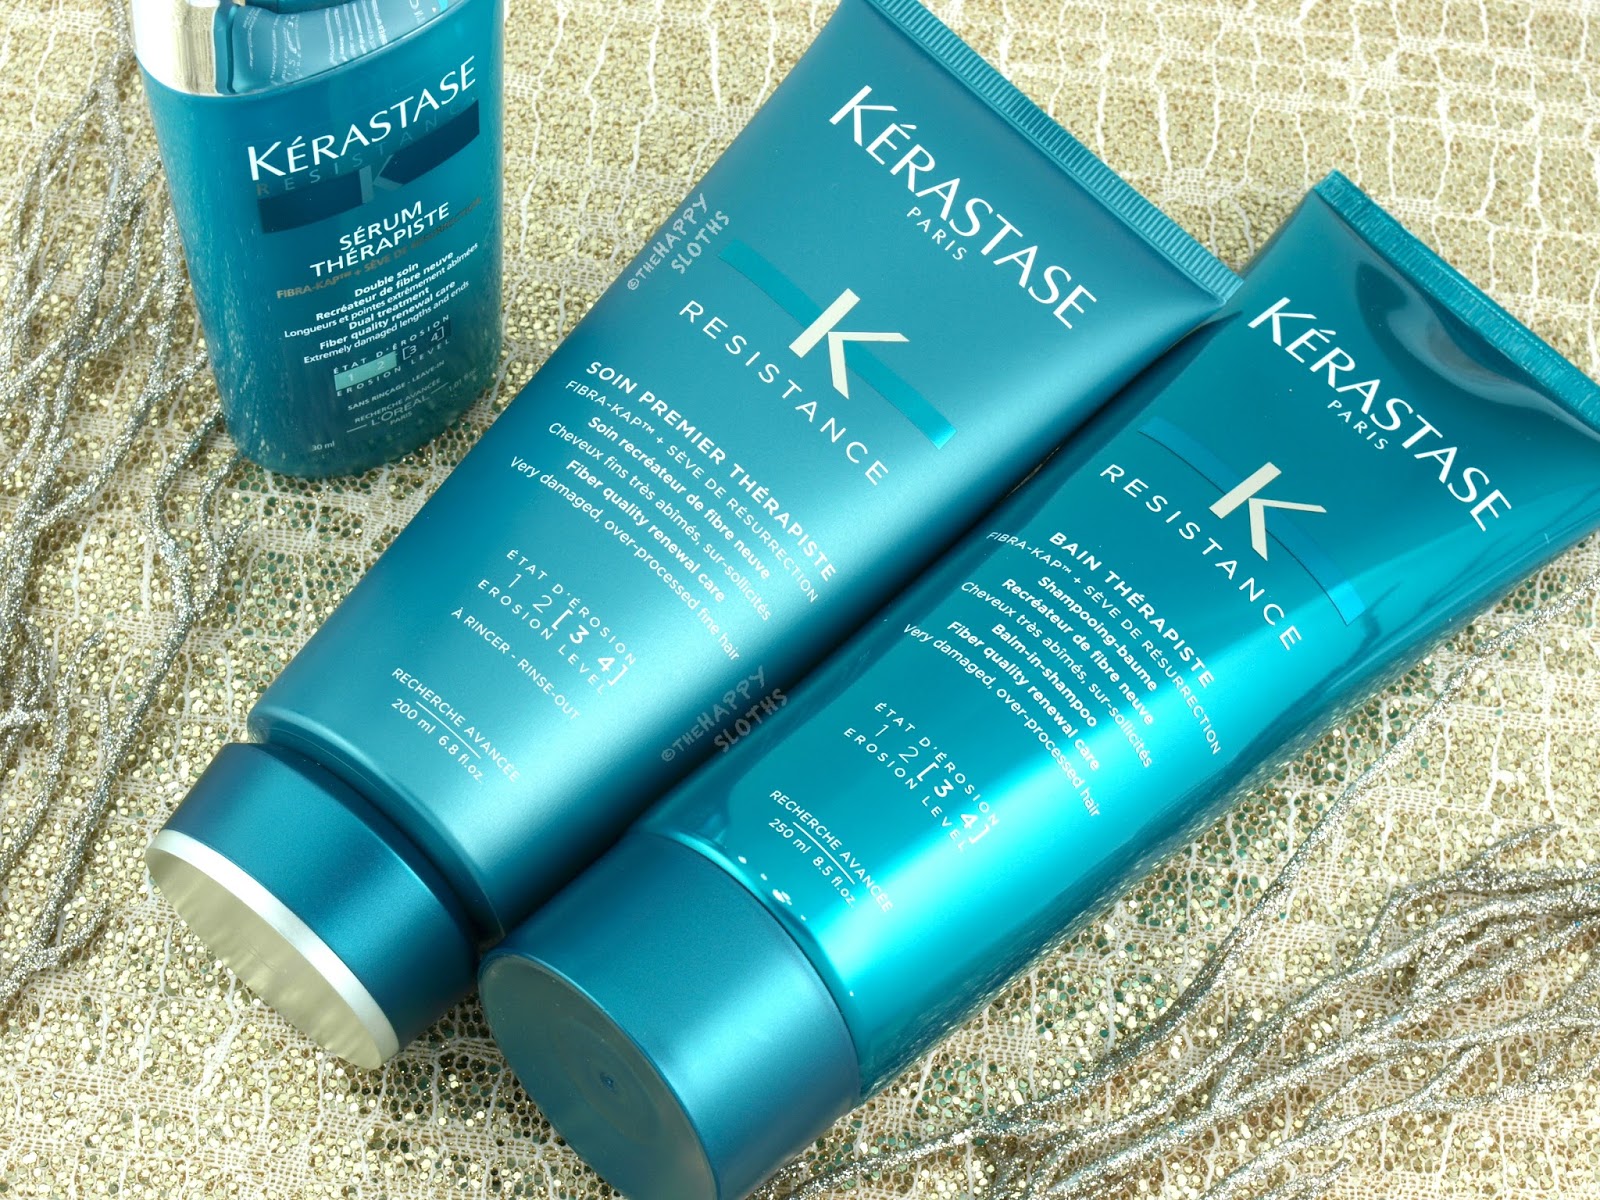 Kerastase Therapiste Holiday Gift Set + Win A Year of Free Hair Care